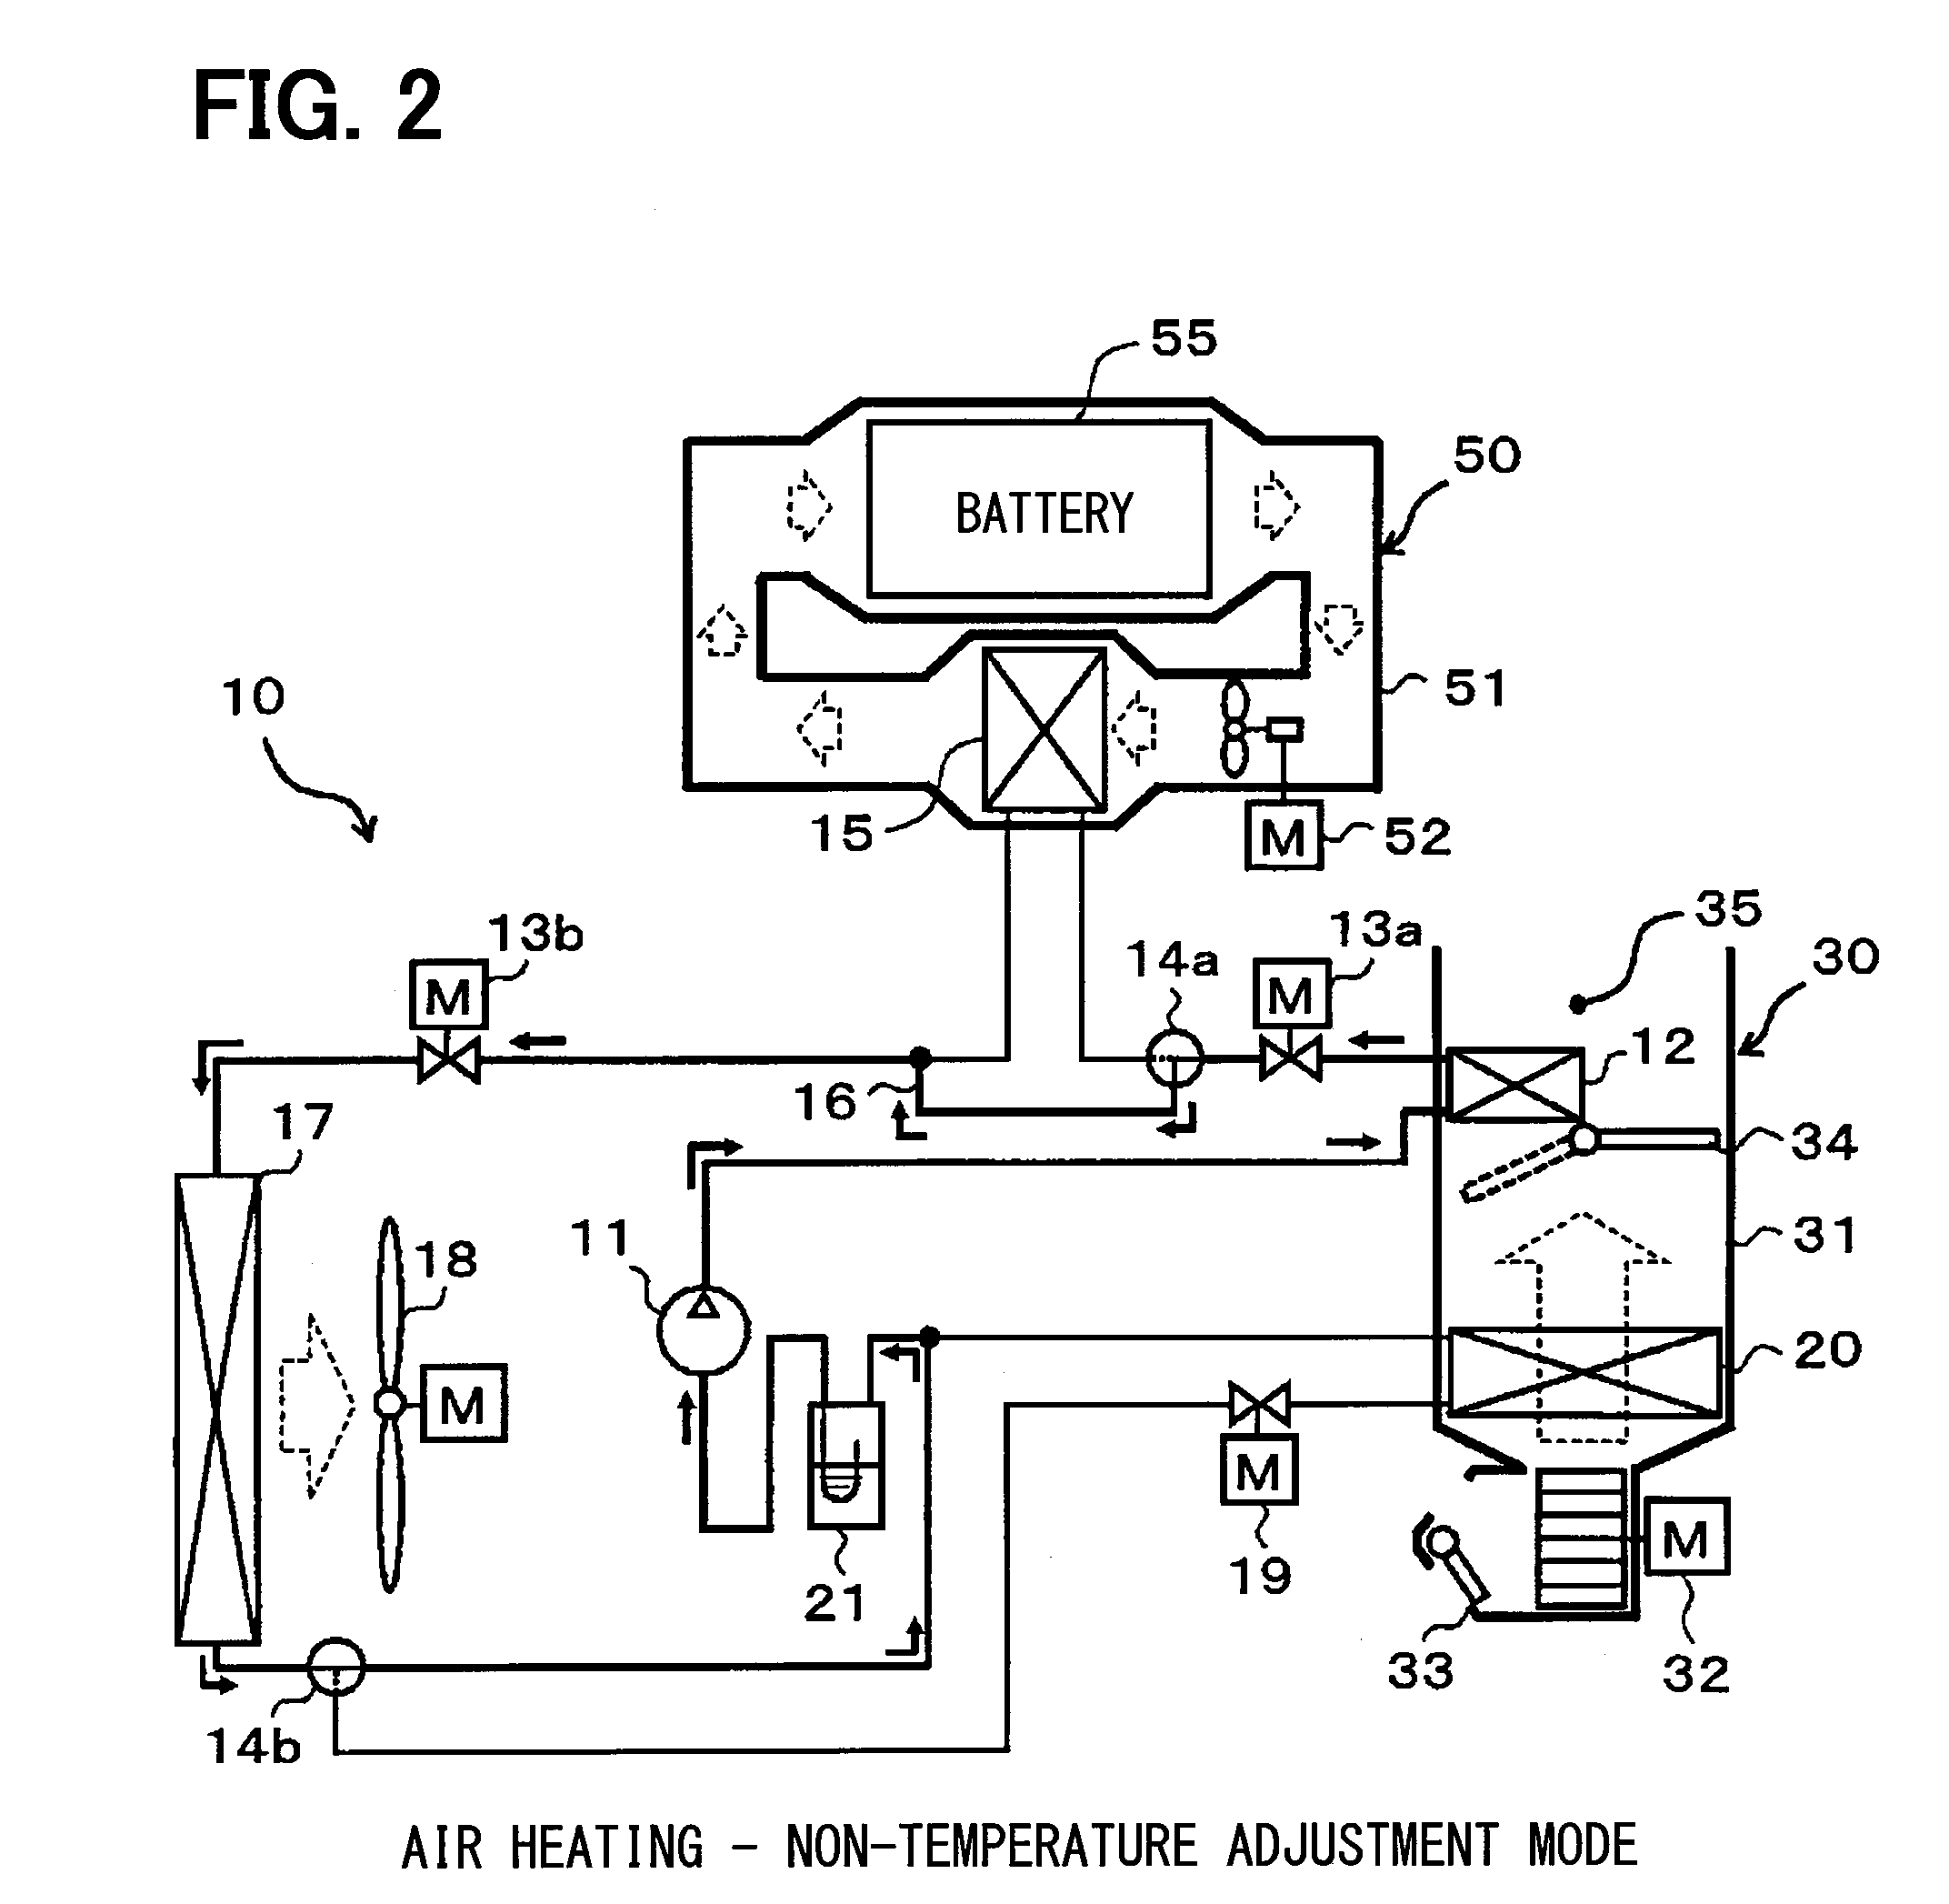 Refrigeration cycle device